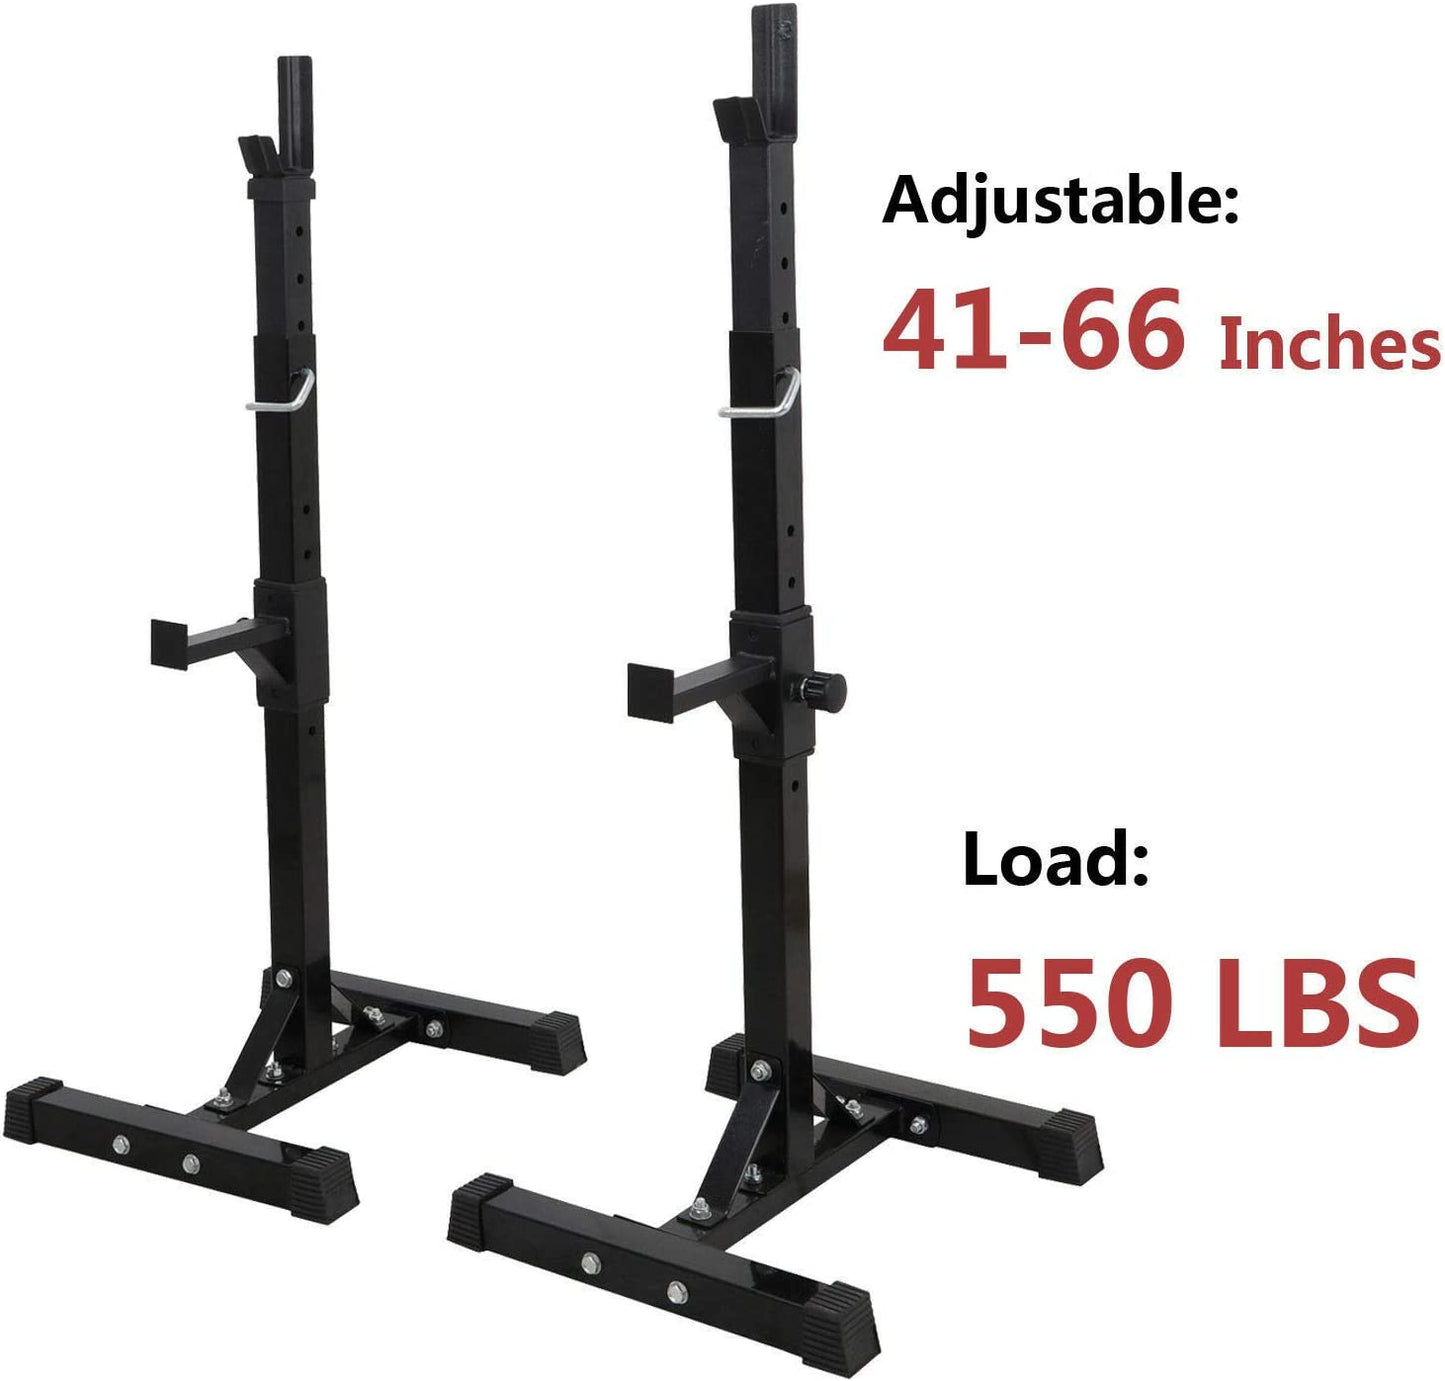 Adjustable Squat Rack Multi-Function Barbell Rack Squat Stand, Dumbble Rack, Weight Lifting Bench Press Dip Station 550lb Capacity Home Gym Equipment